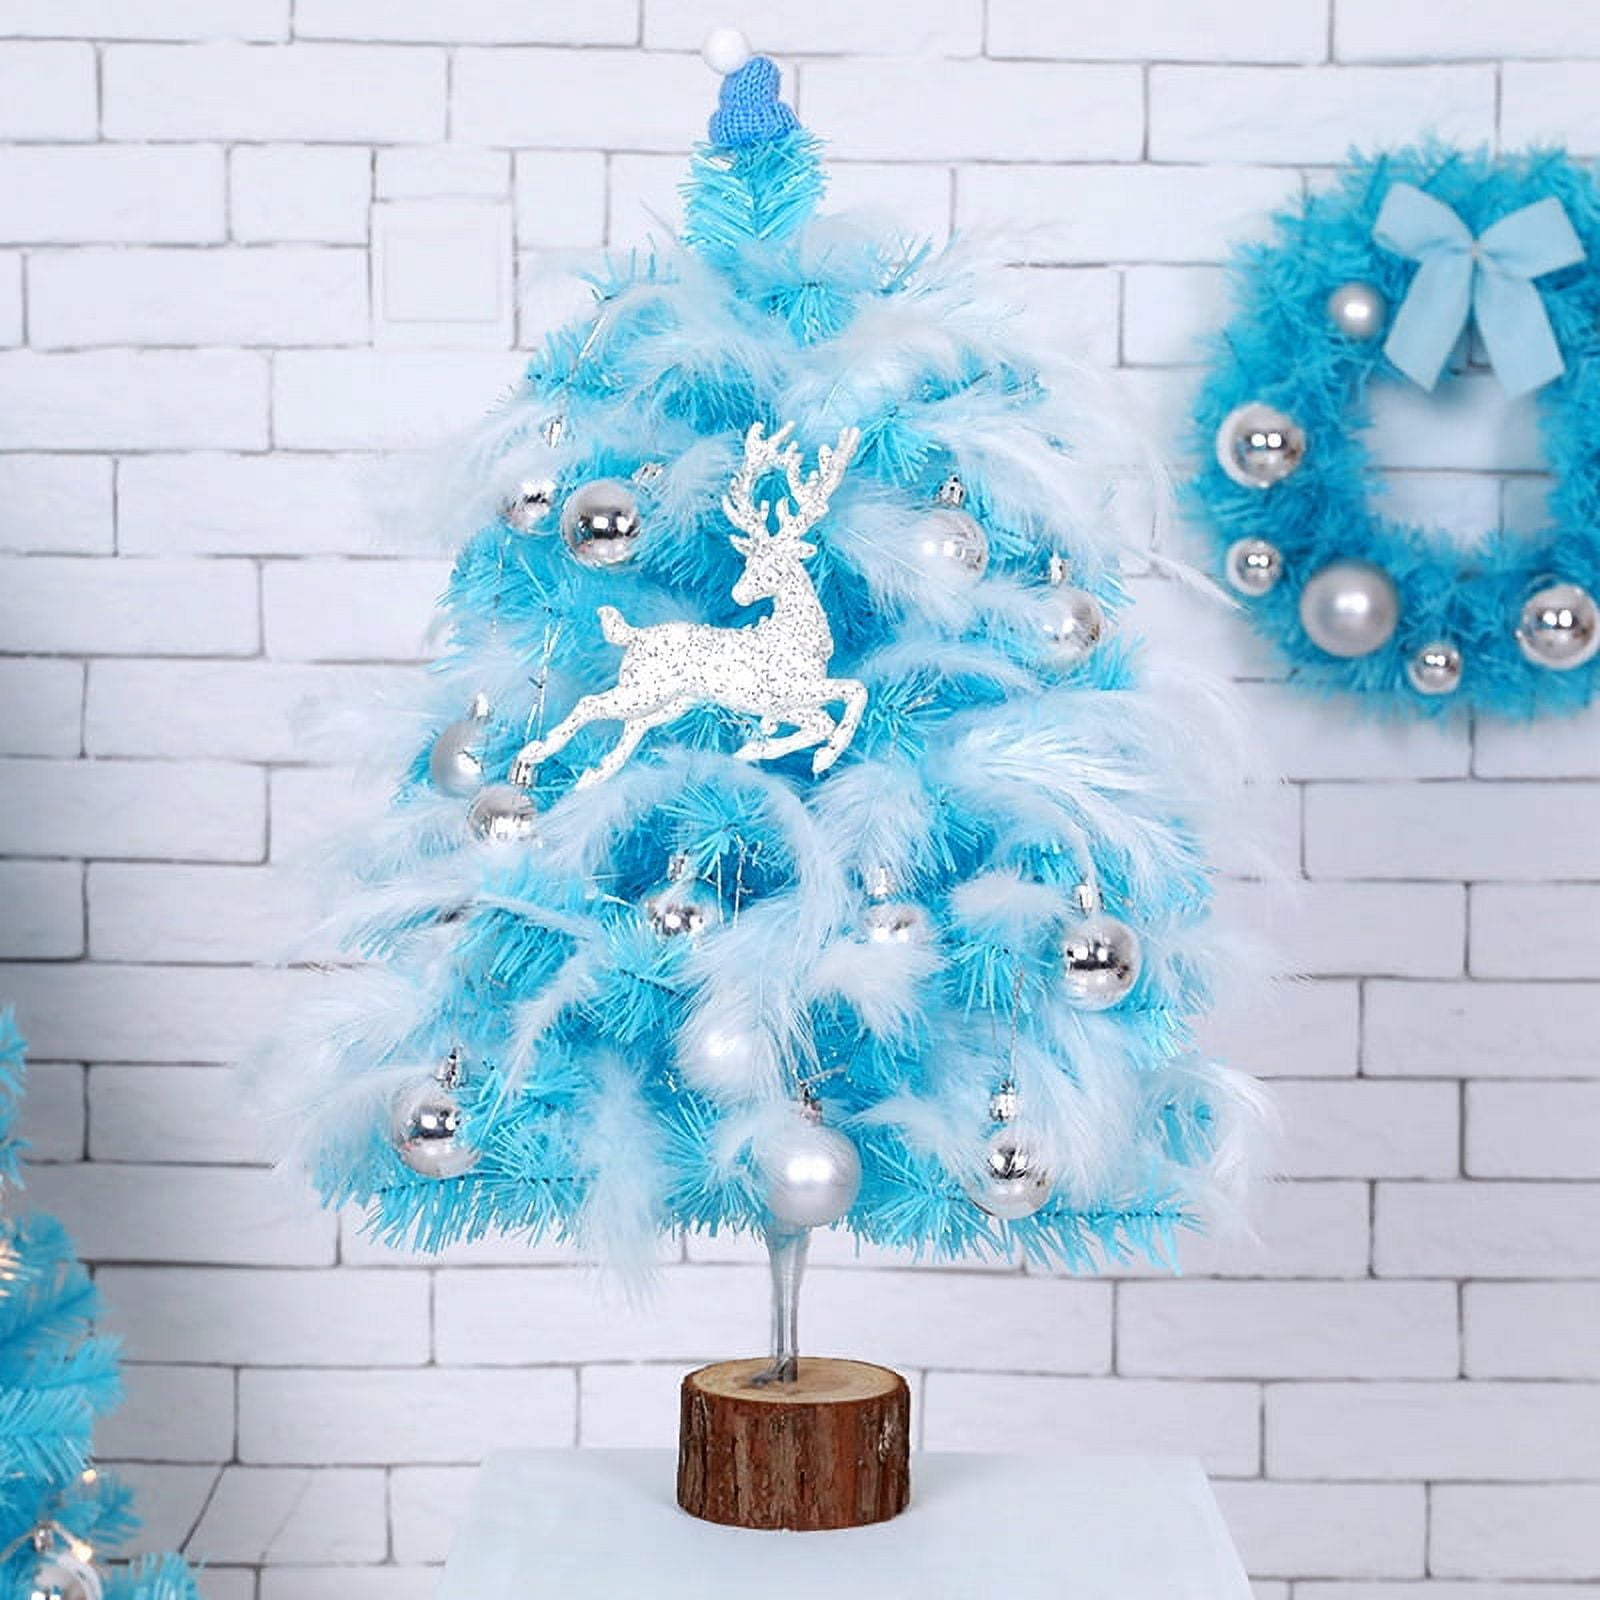 Blue decorated tree with feathers.